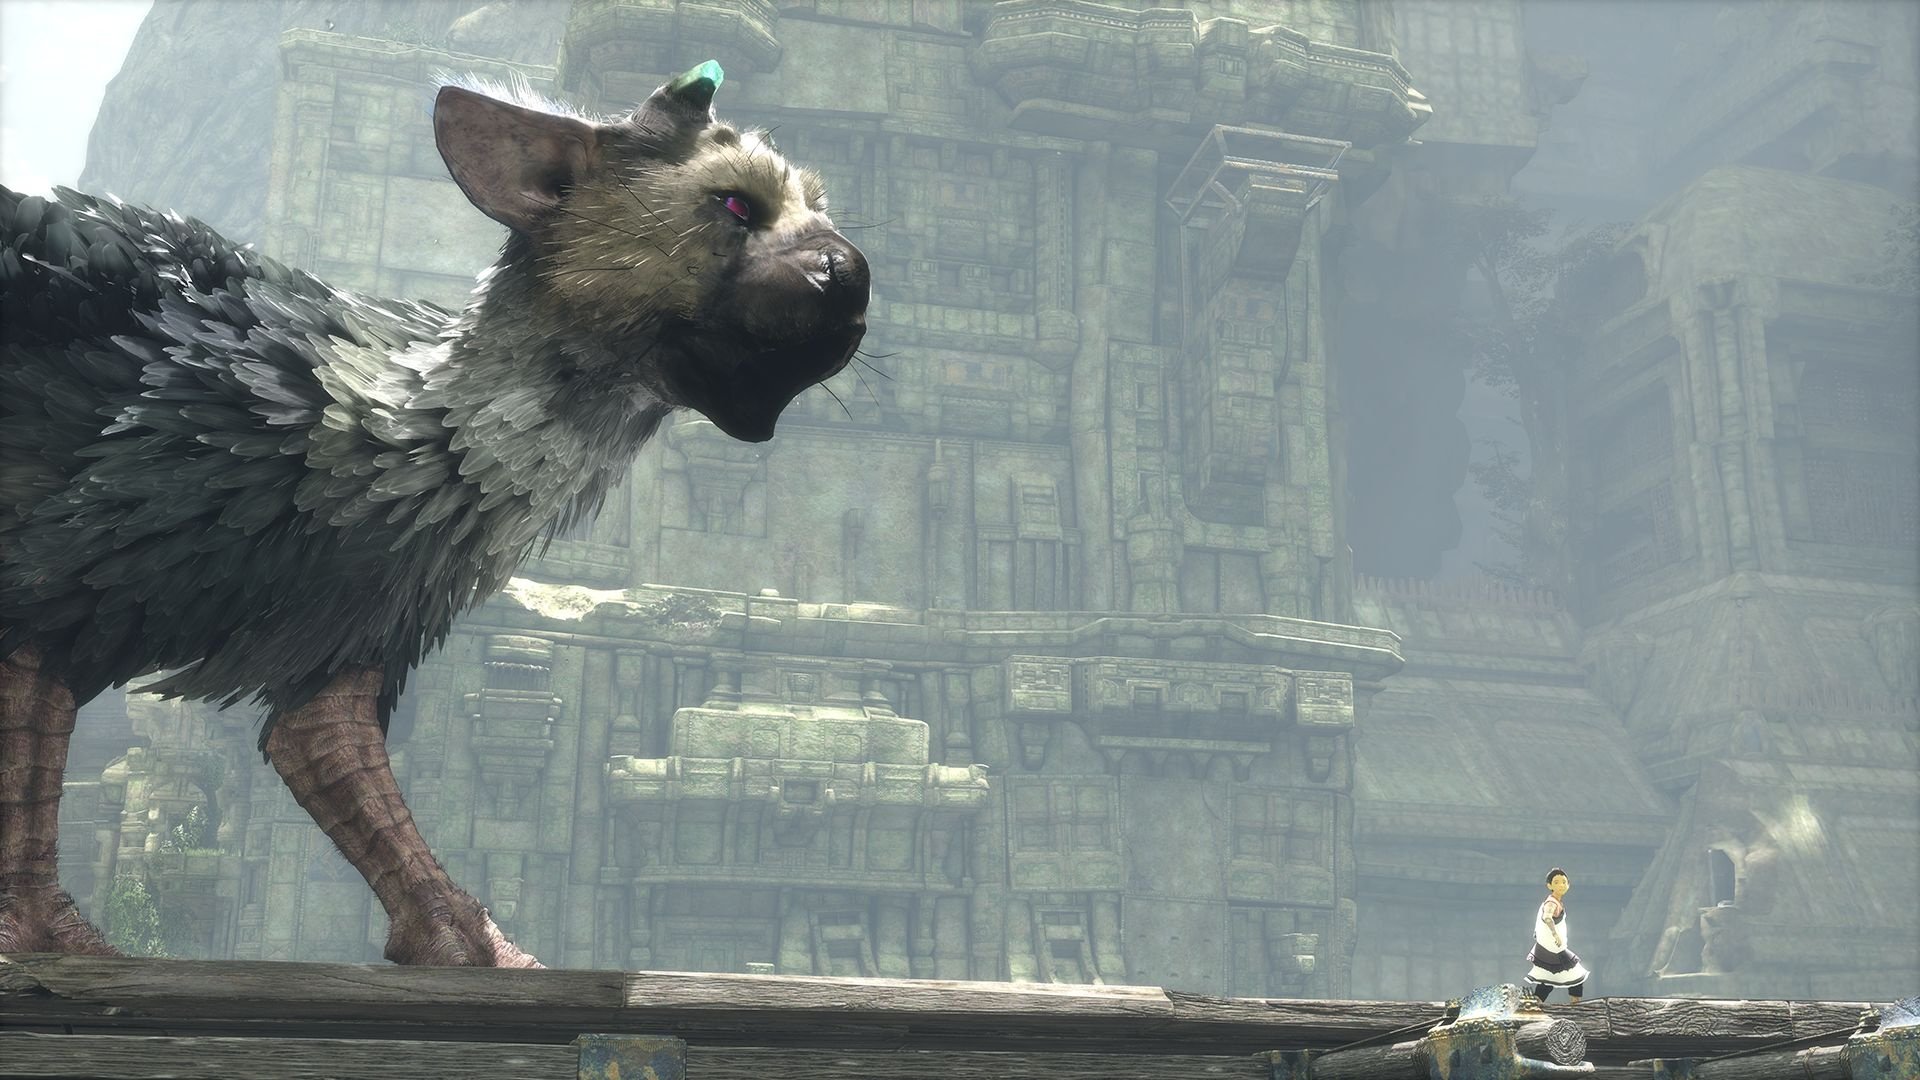 The Last Guardian Gameplay - Part 1 (PS4, 1080p) 